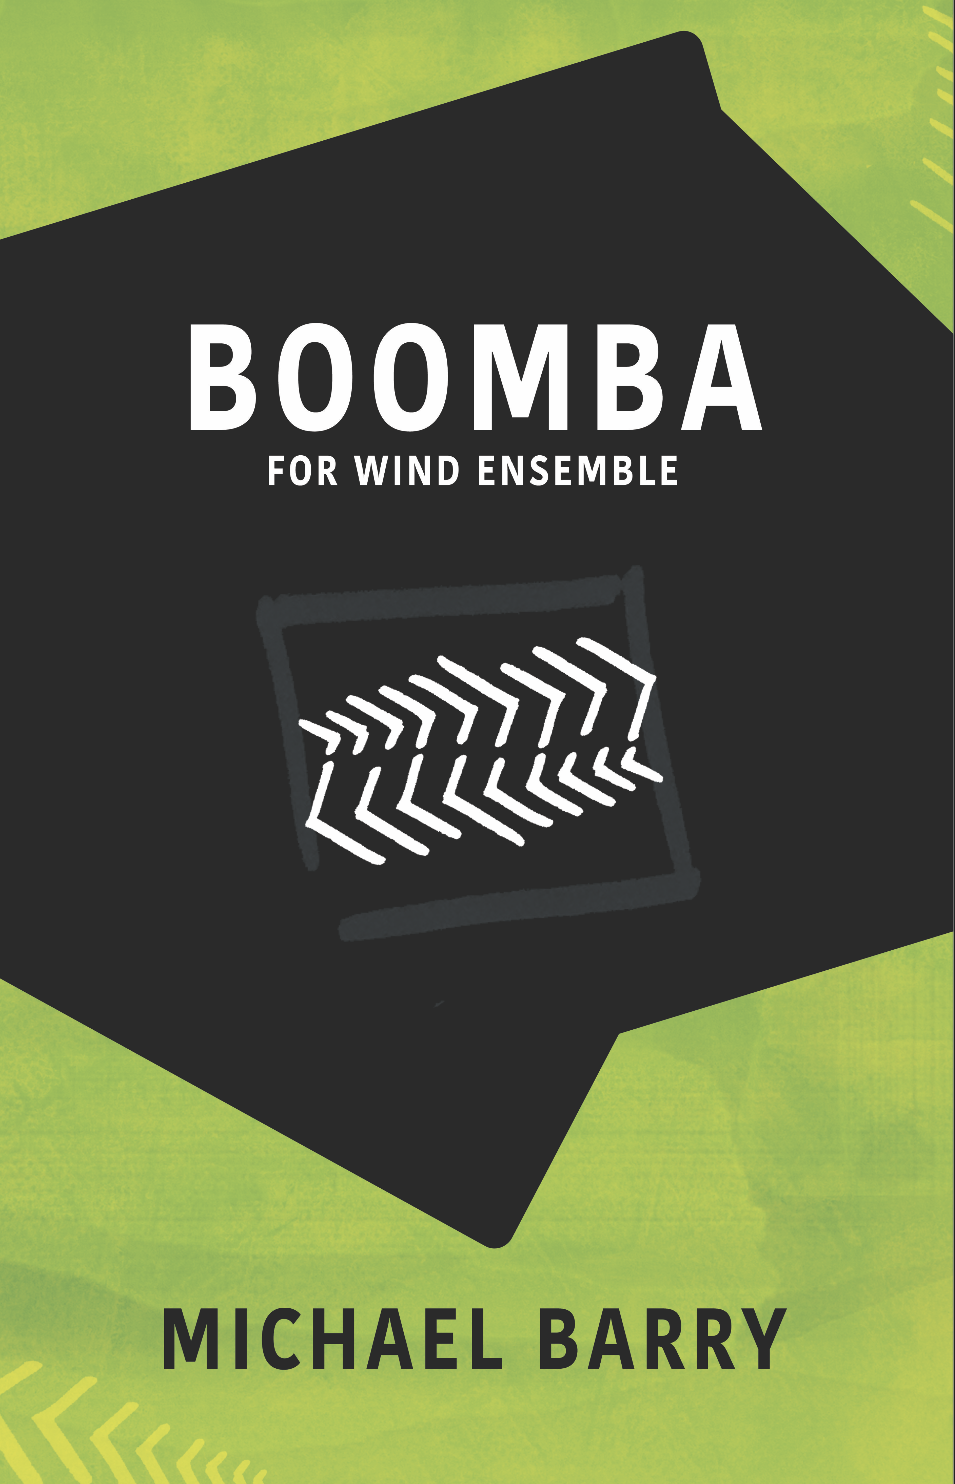 Boomba by Michael Barry